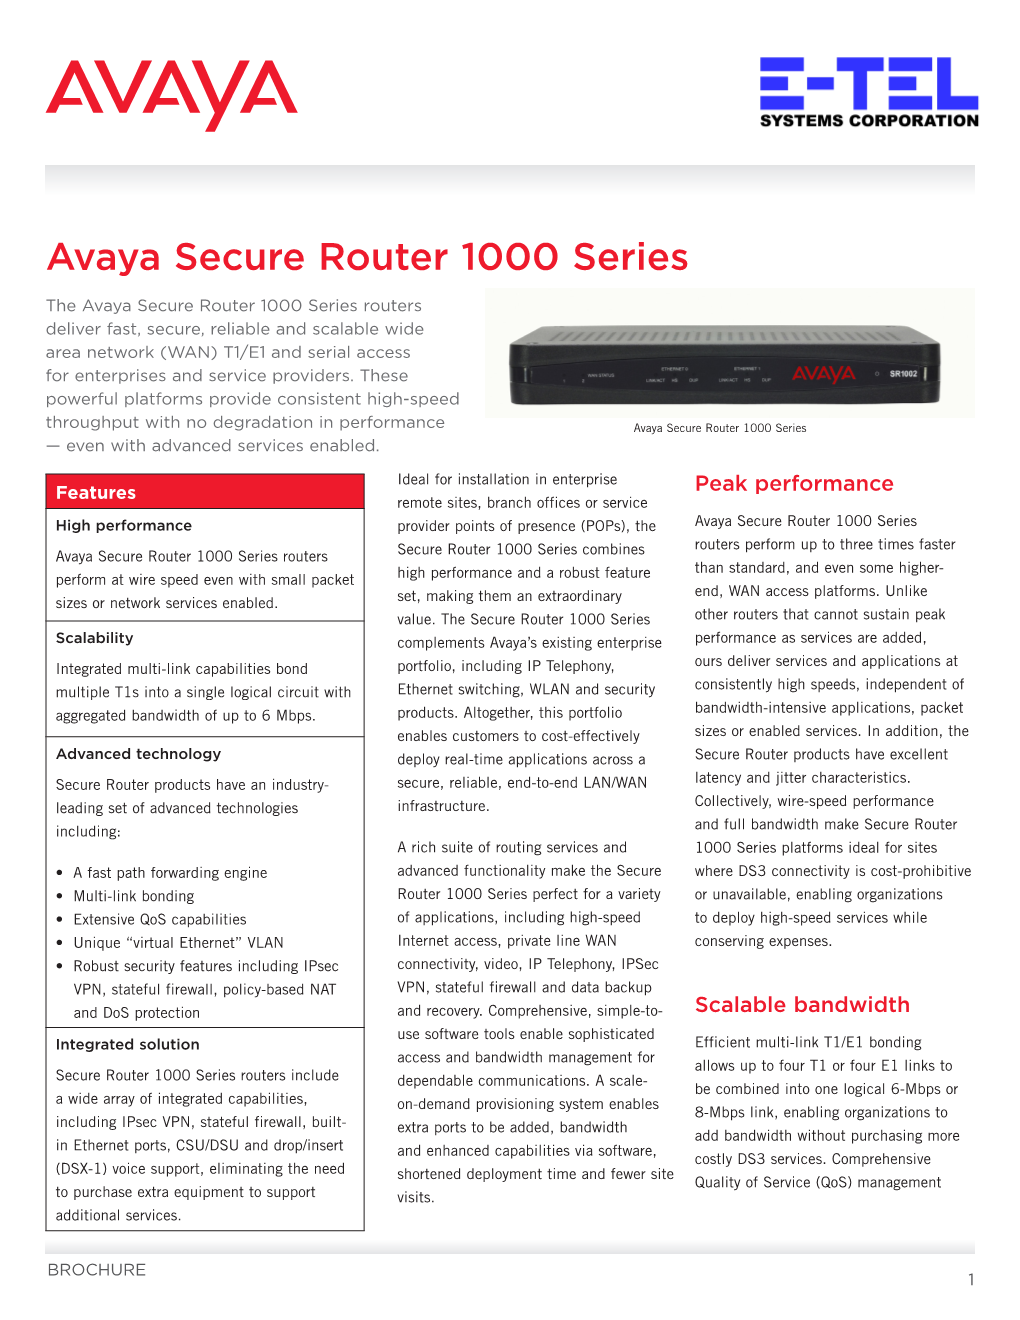 Avaya Secure Router 1000 Series